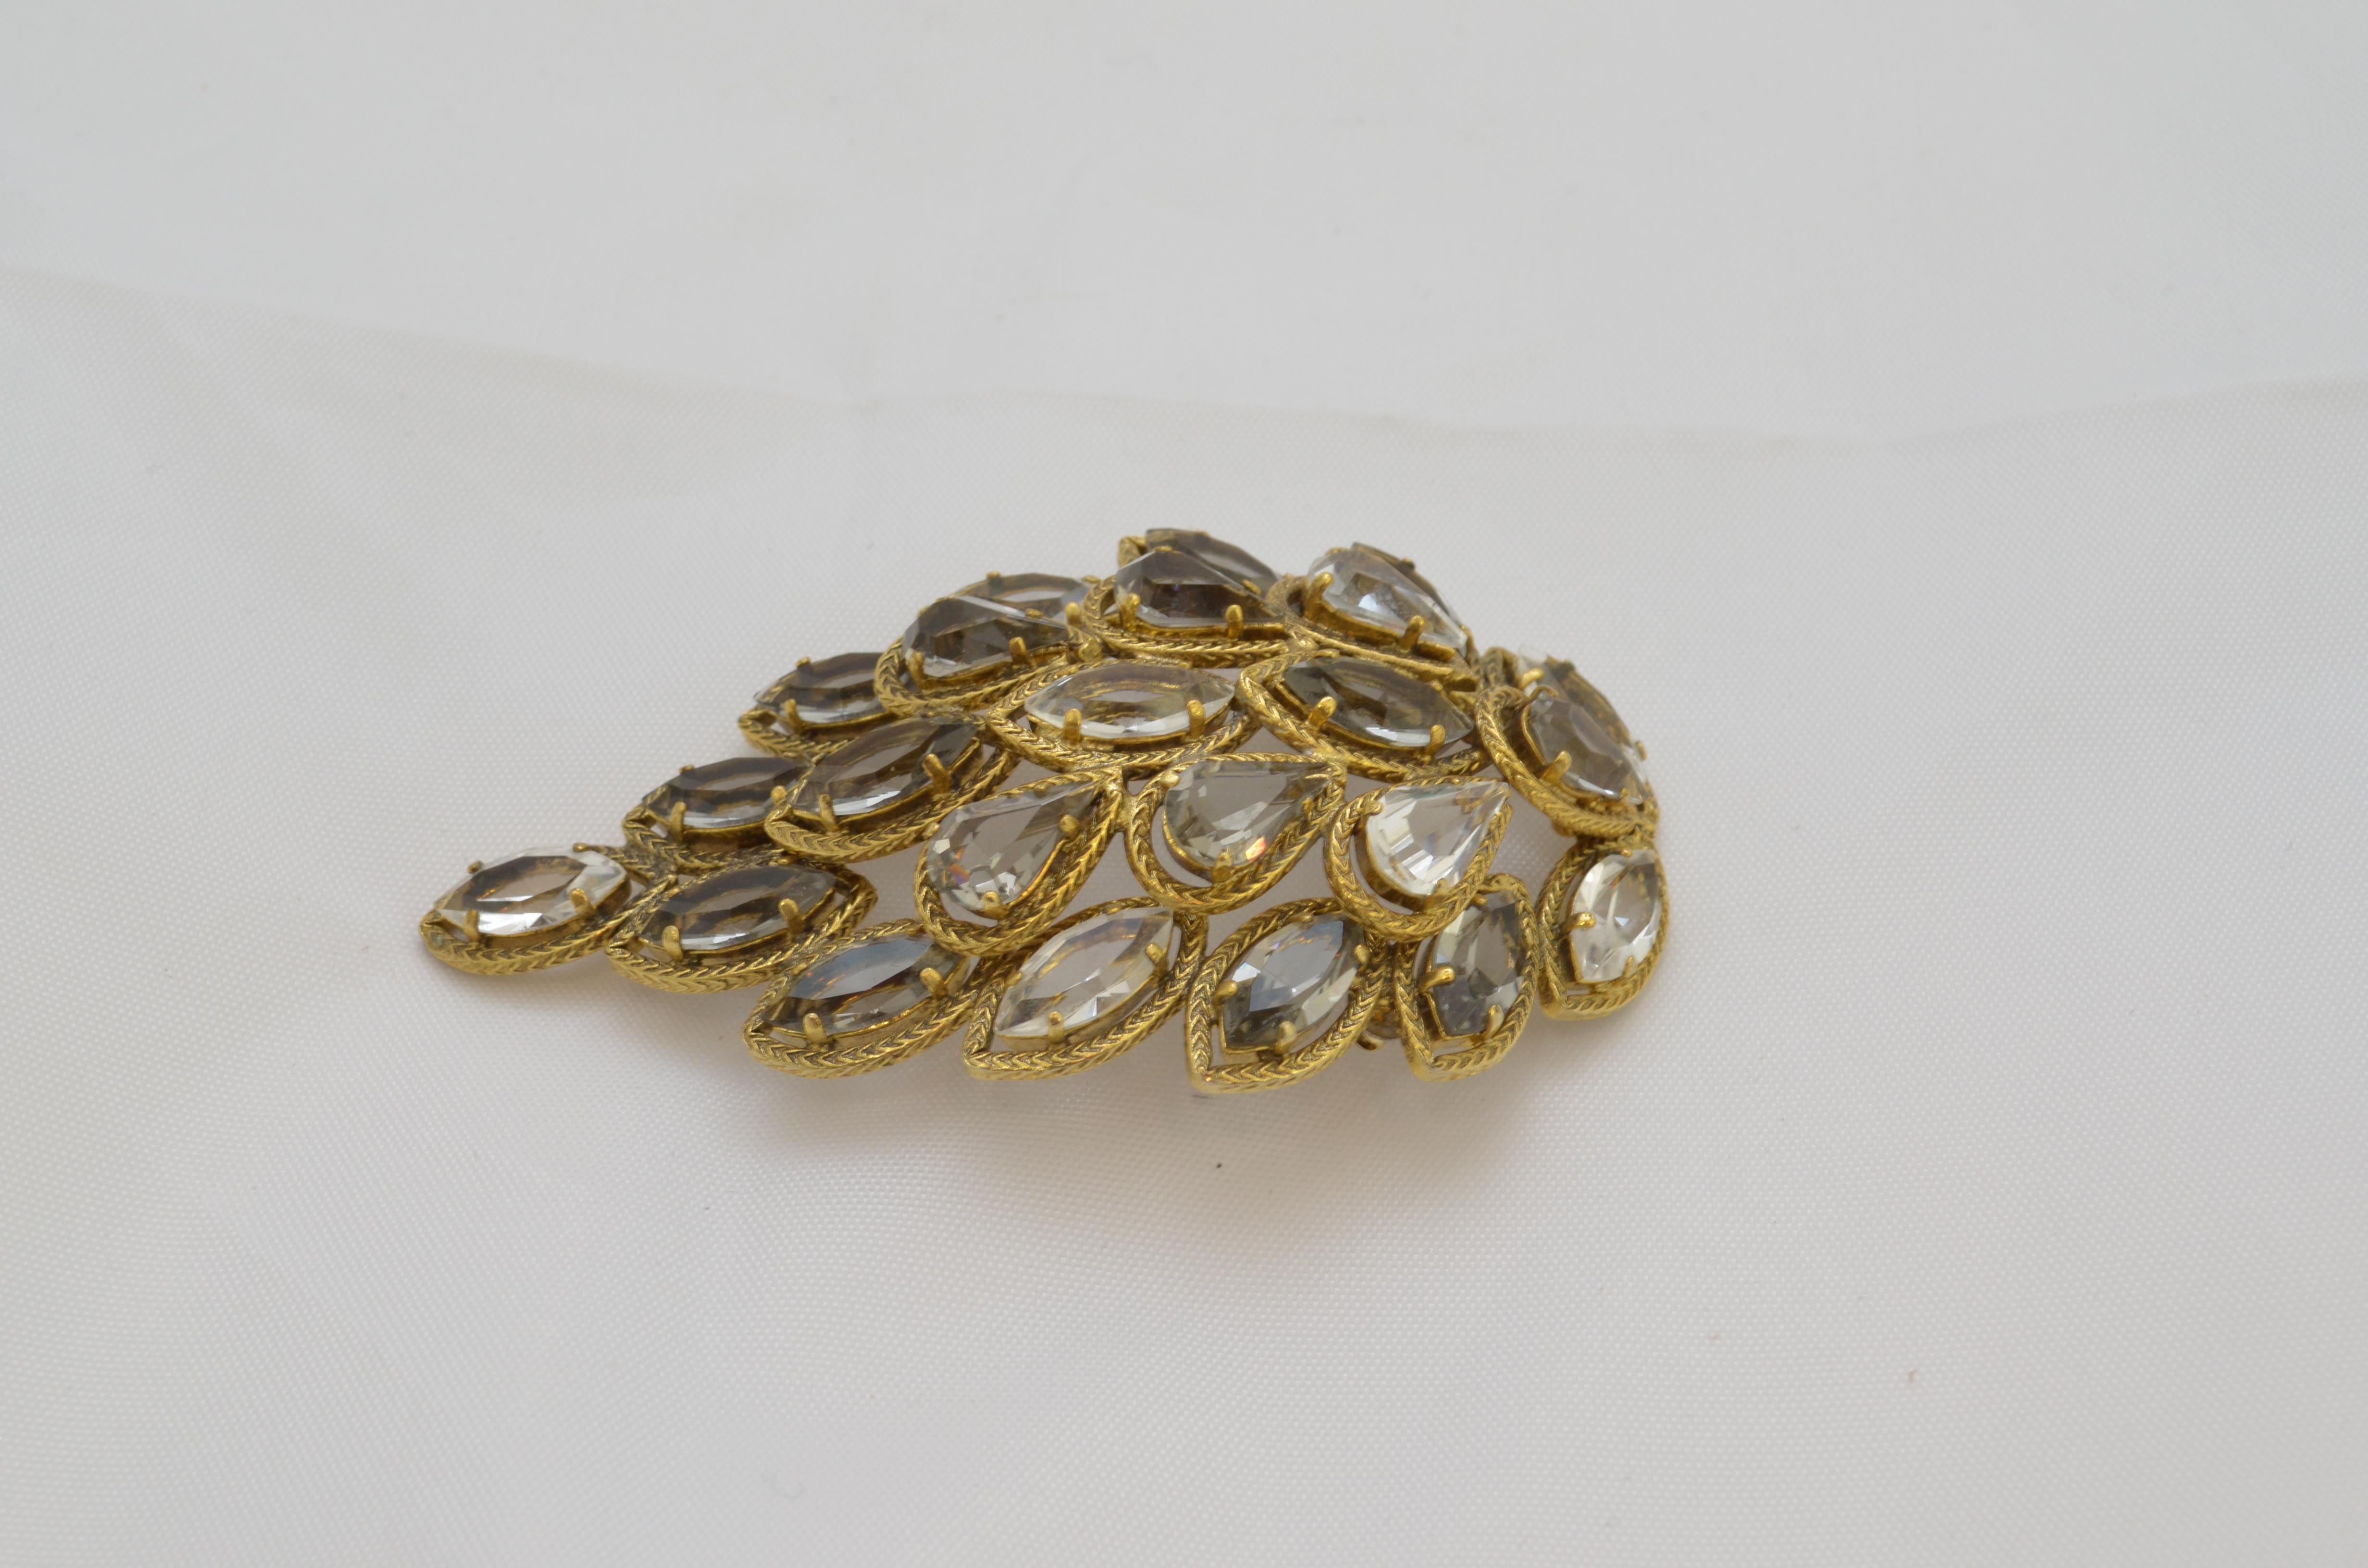 Christian Dior 1962 Vintage Crystal Leaf Brooch featured in a gold-tone metal with faceted crystals. Signed at the back (Chr. Dior 1962). Brooch is in great vintage condition.